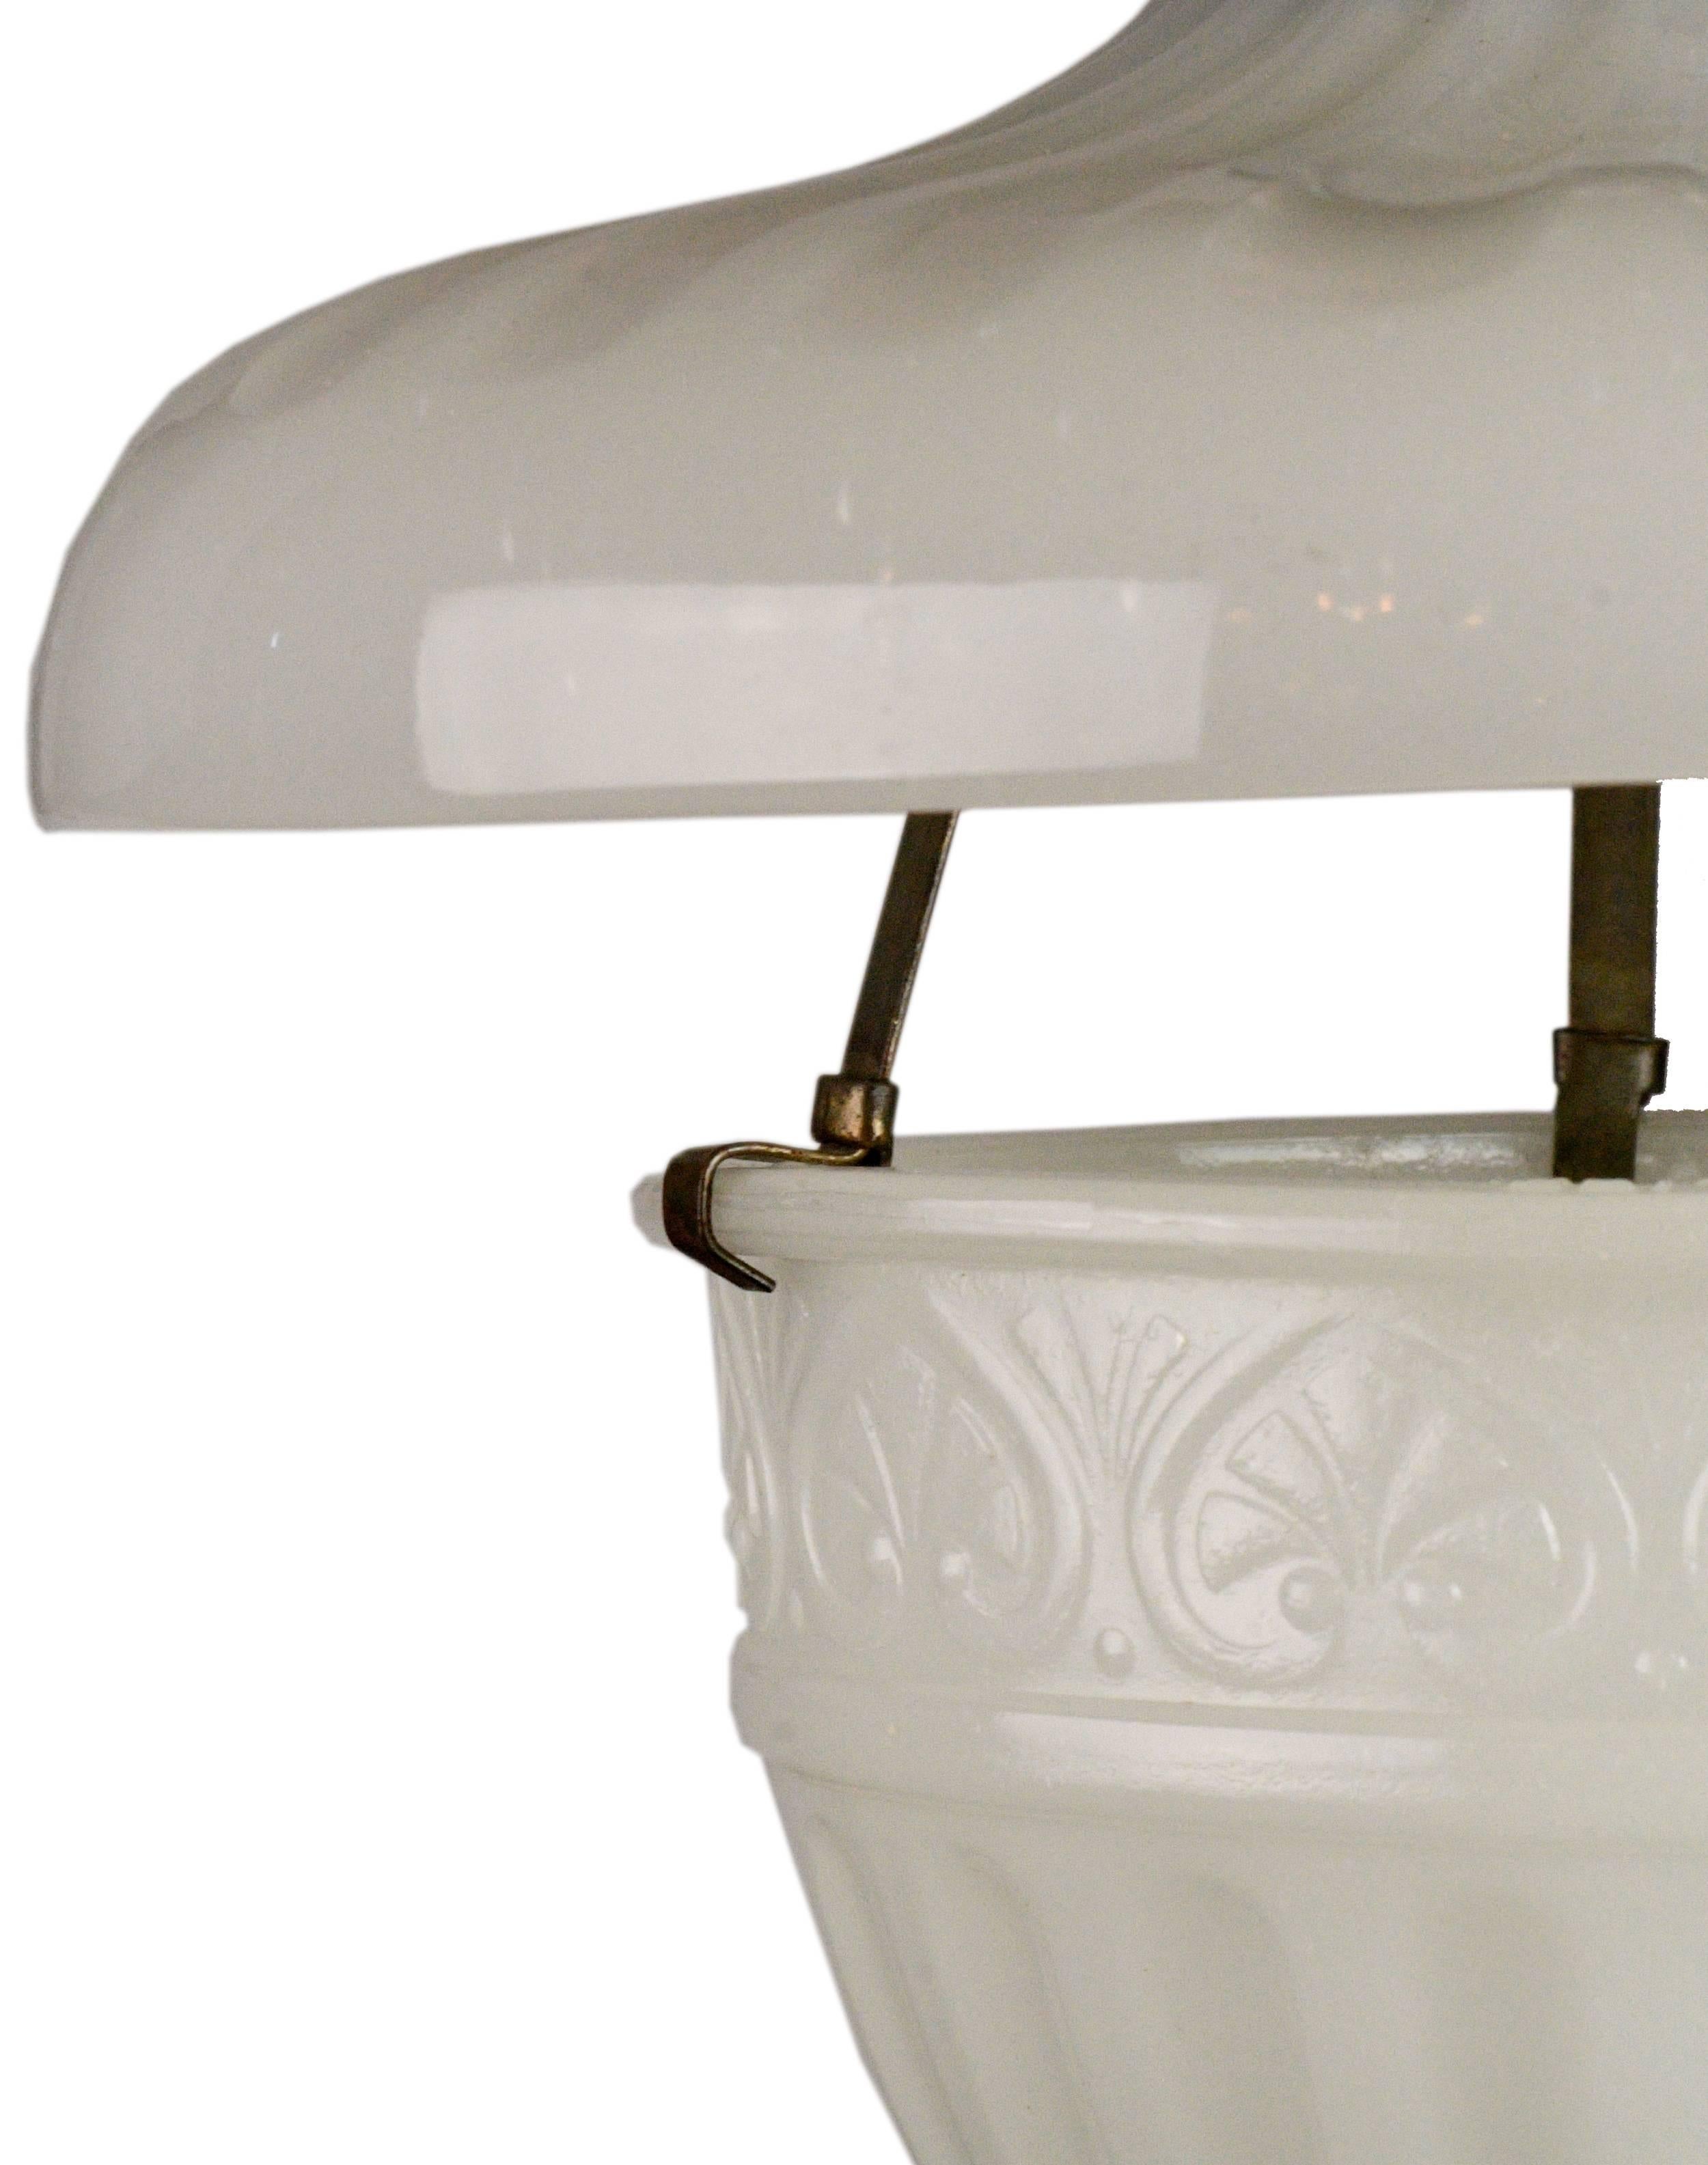 This beautiful Peerlite flush mount was scientifically designed to provide your home with the most beautiful light that the 1920s had to offer. These fixtures were specifically designed to utilize the light as fully as possible to provide you with